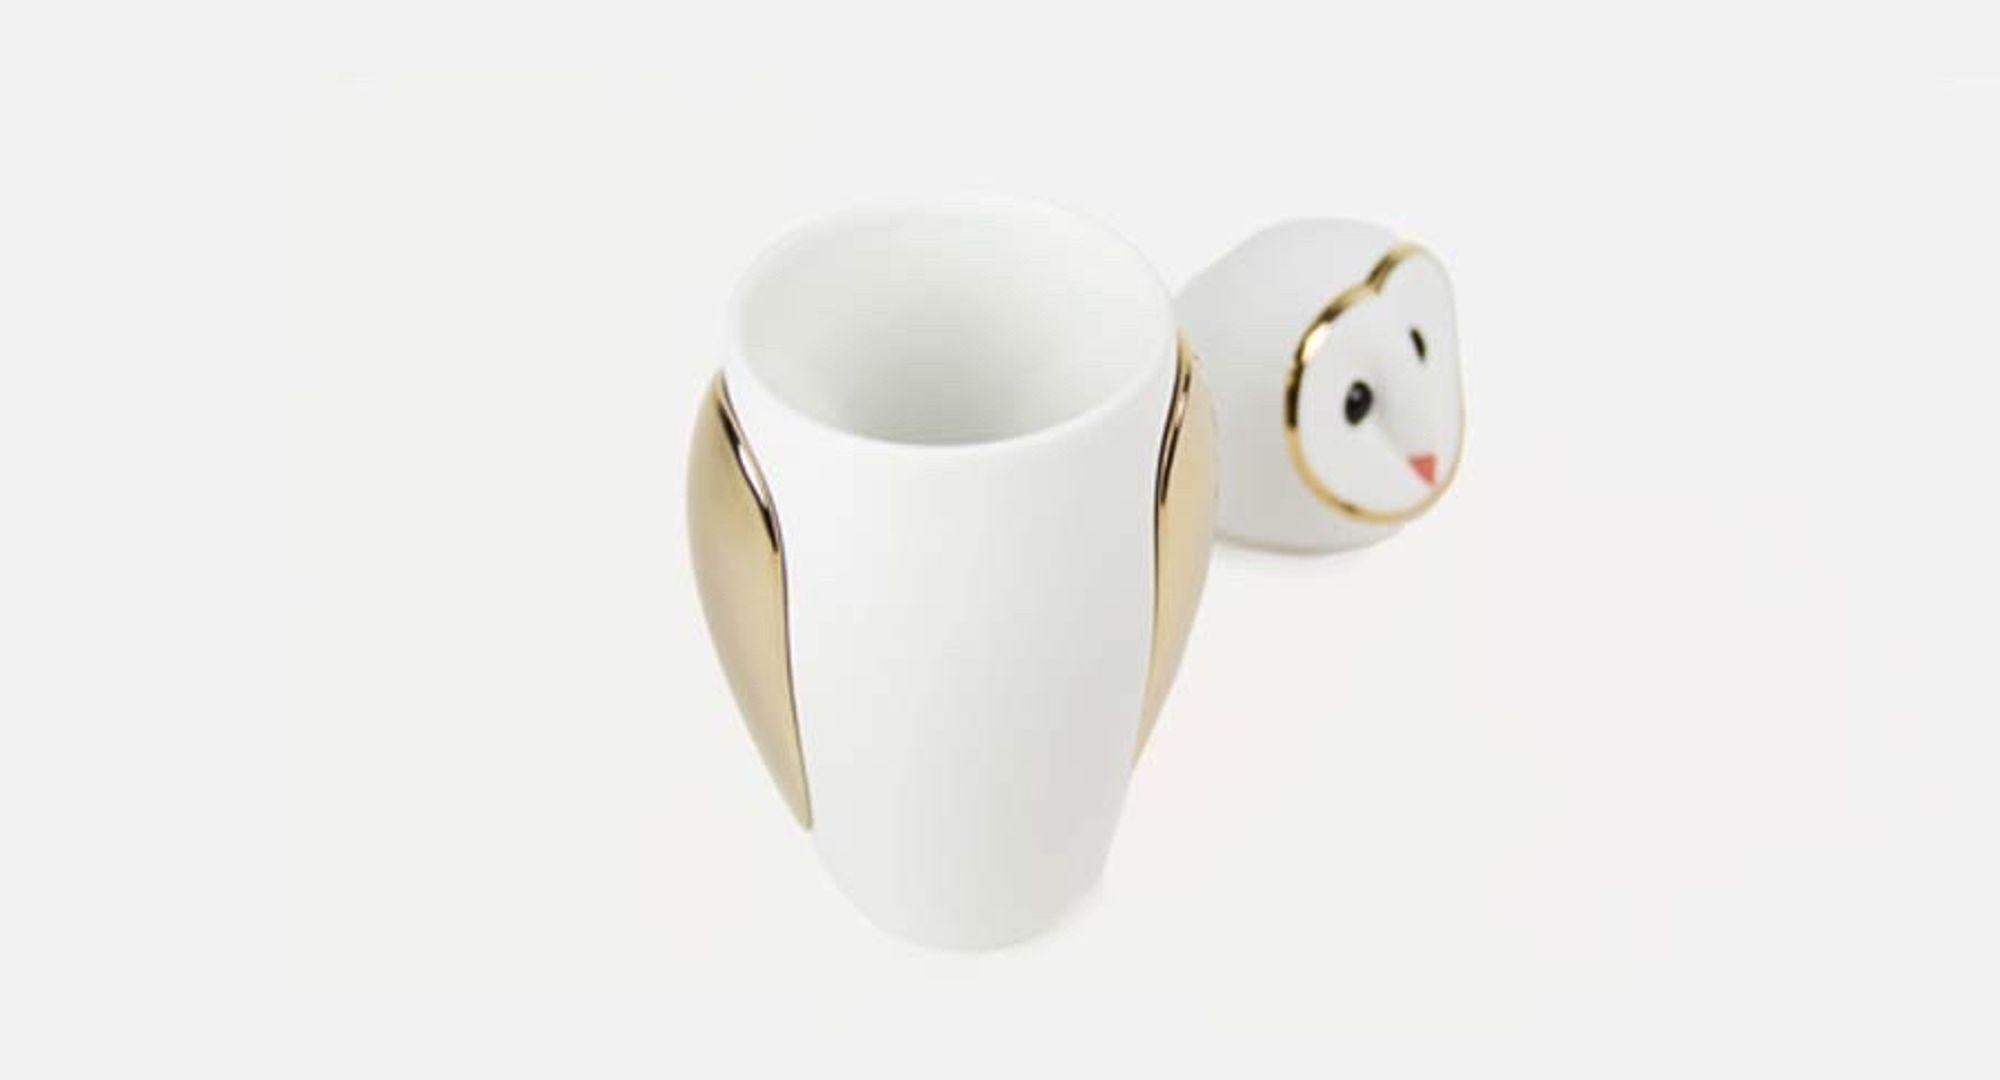 The Owls by Manolo Bossi is a collection designed for the brand Bosa that has an owl, an barn owl and a pygmy owl made of glazed ceramic hand-finished with precious metals (gold, copper, platinum).

There is a magic and mysterious world which